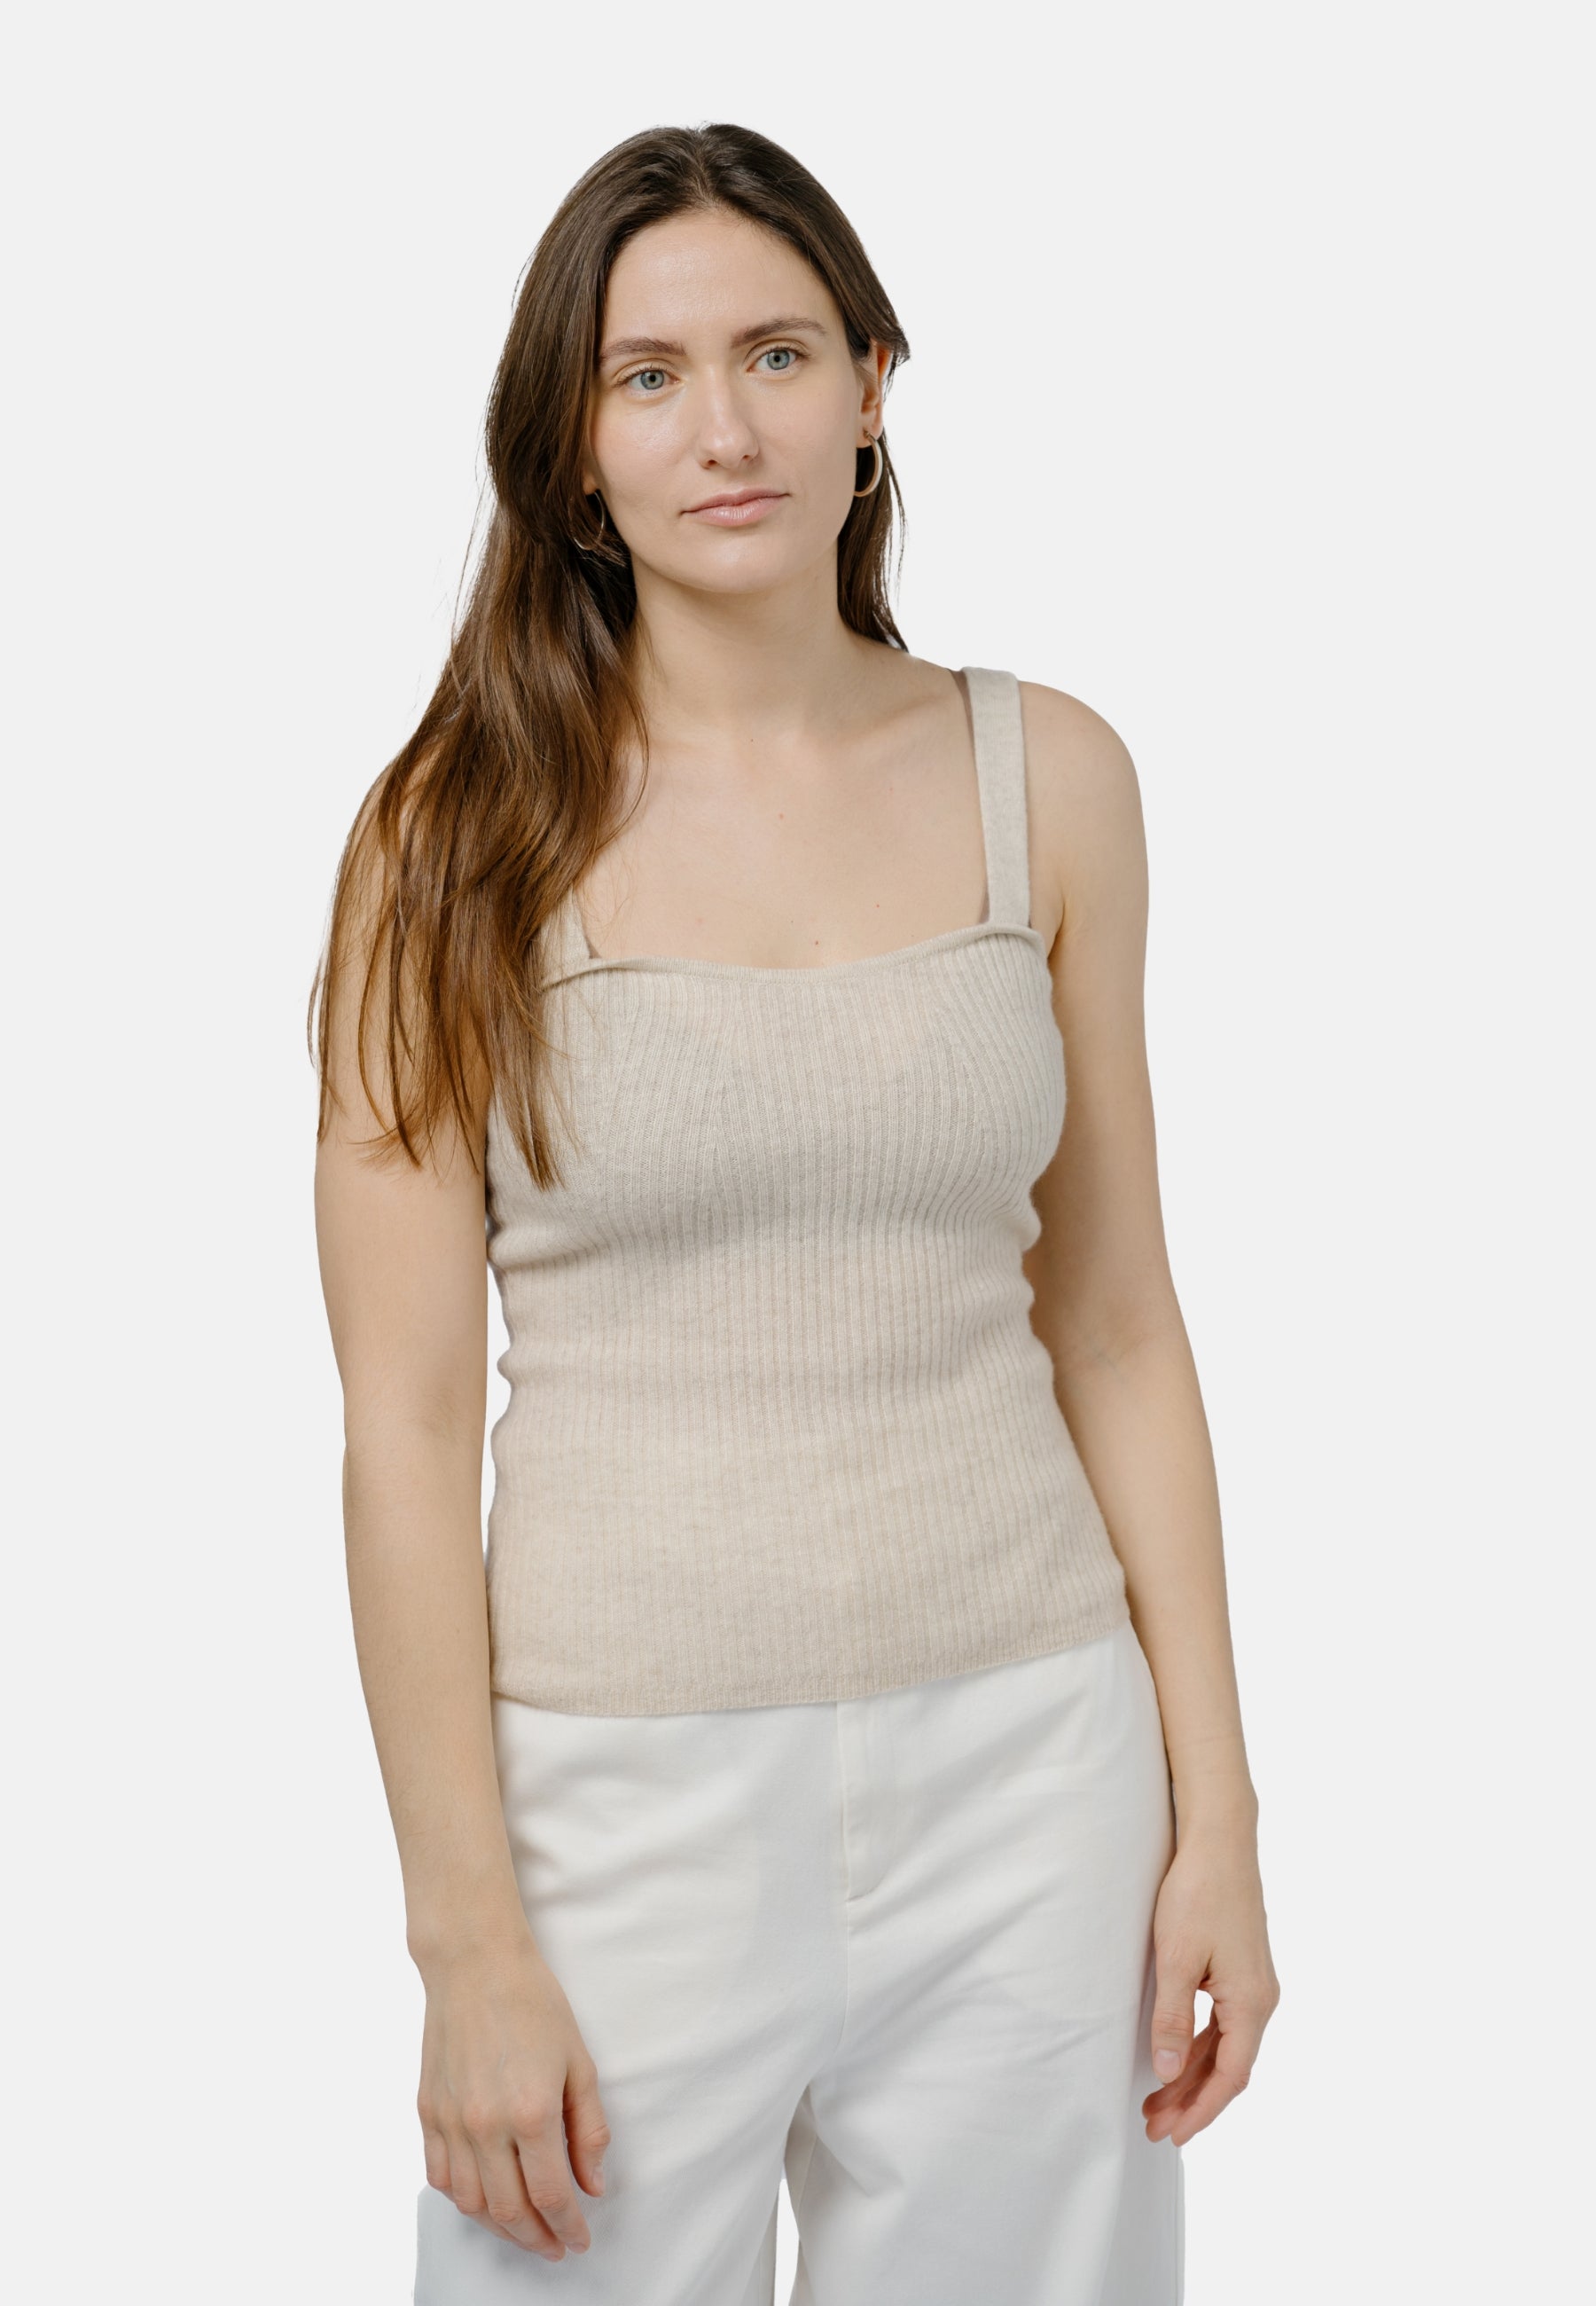 Beige top Ulaanbaatar made of 100% cashmere by 1 People